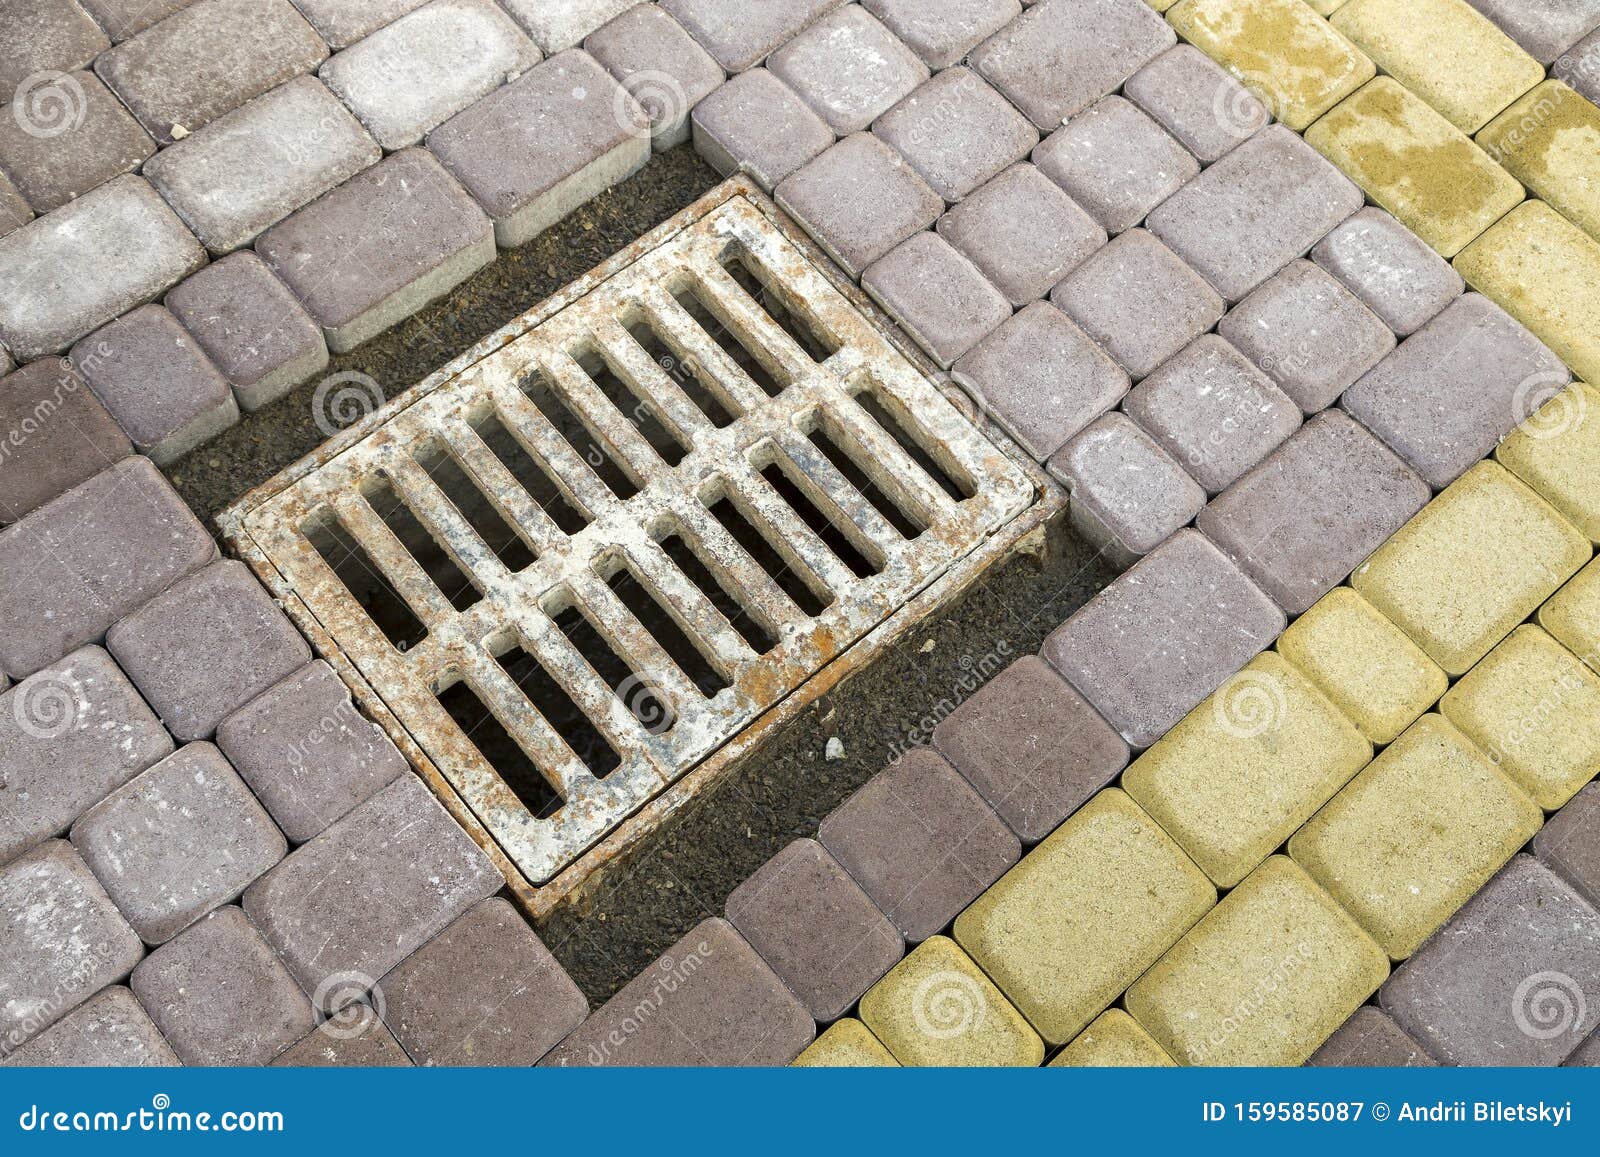 Old Rusted Metal Gutter For Rain Water On The Stone Paved Sidewalk Stock Image Image of dirty